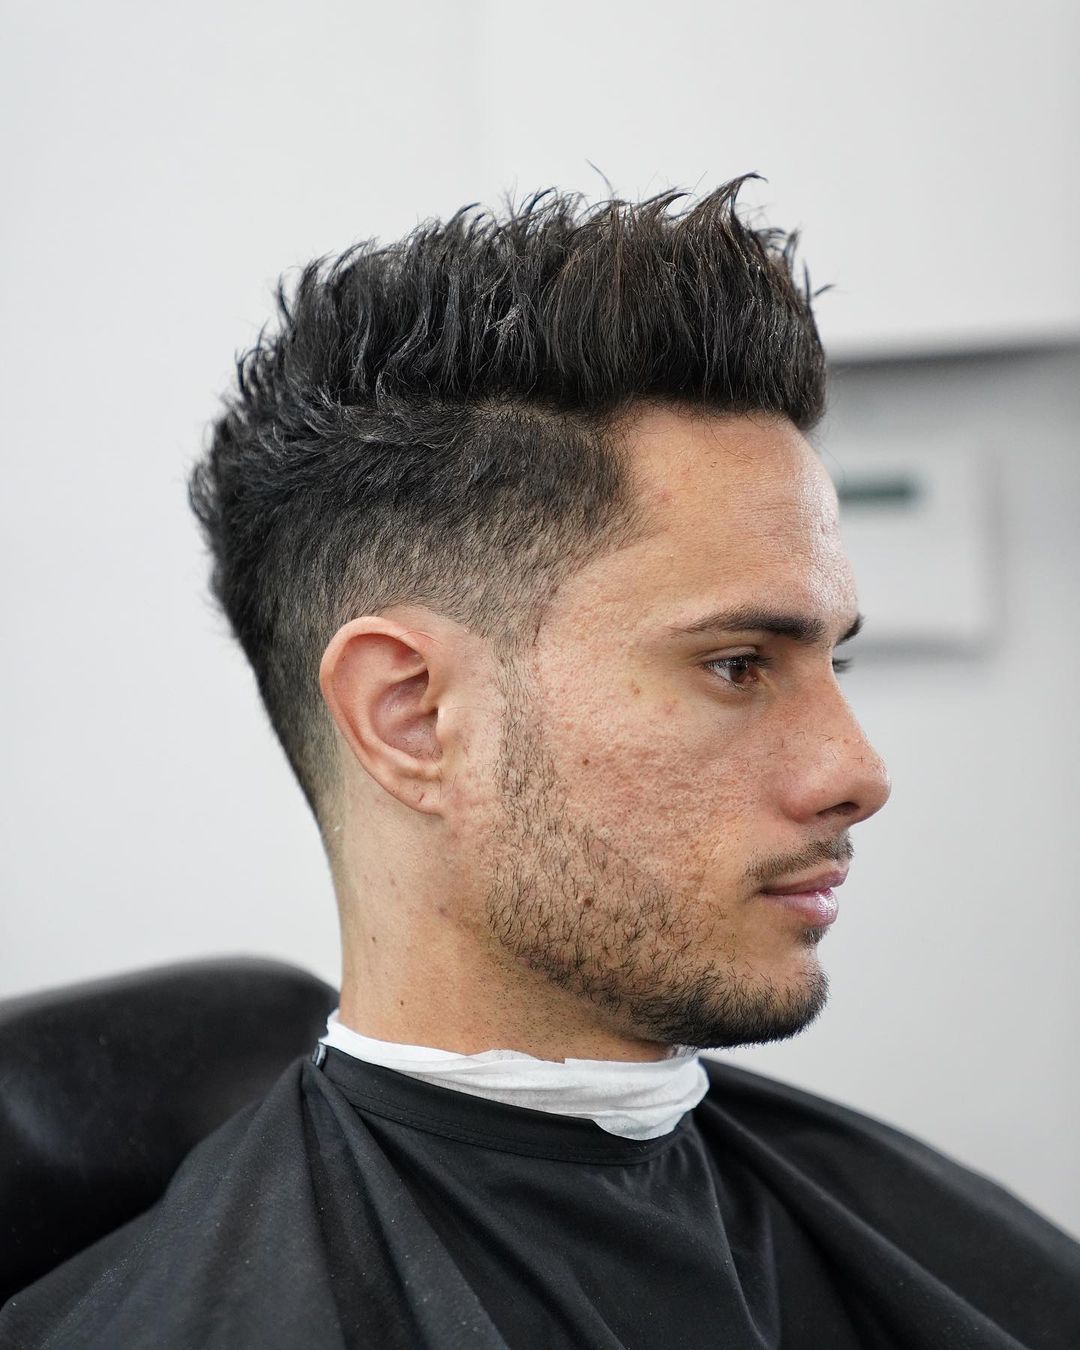 Top 5 Hairstyles For Men and How To Achieve Them  When In Manila